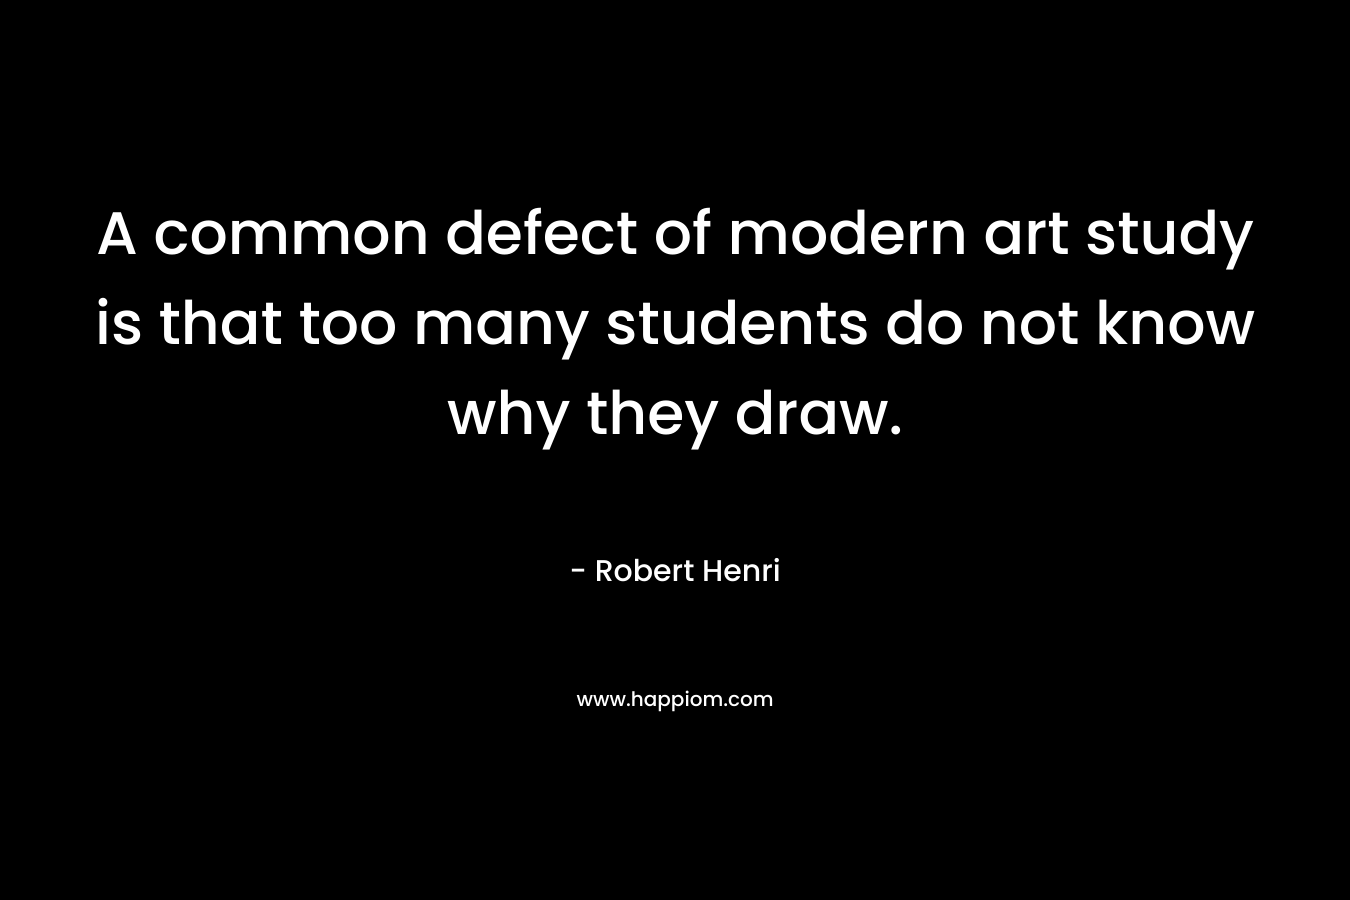 A common defect of modern art study is that too many students do not know why they draw.